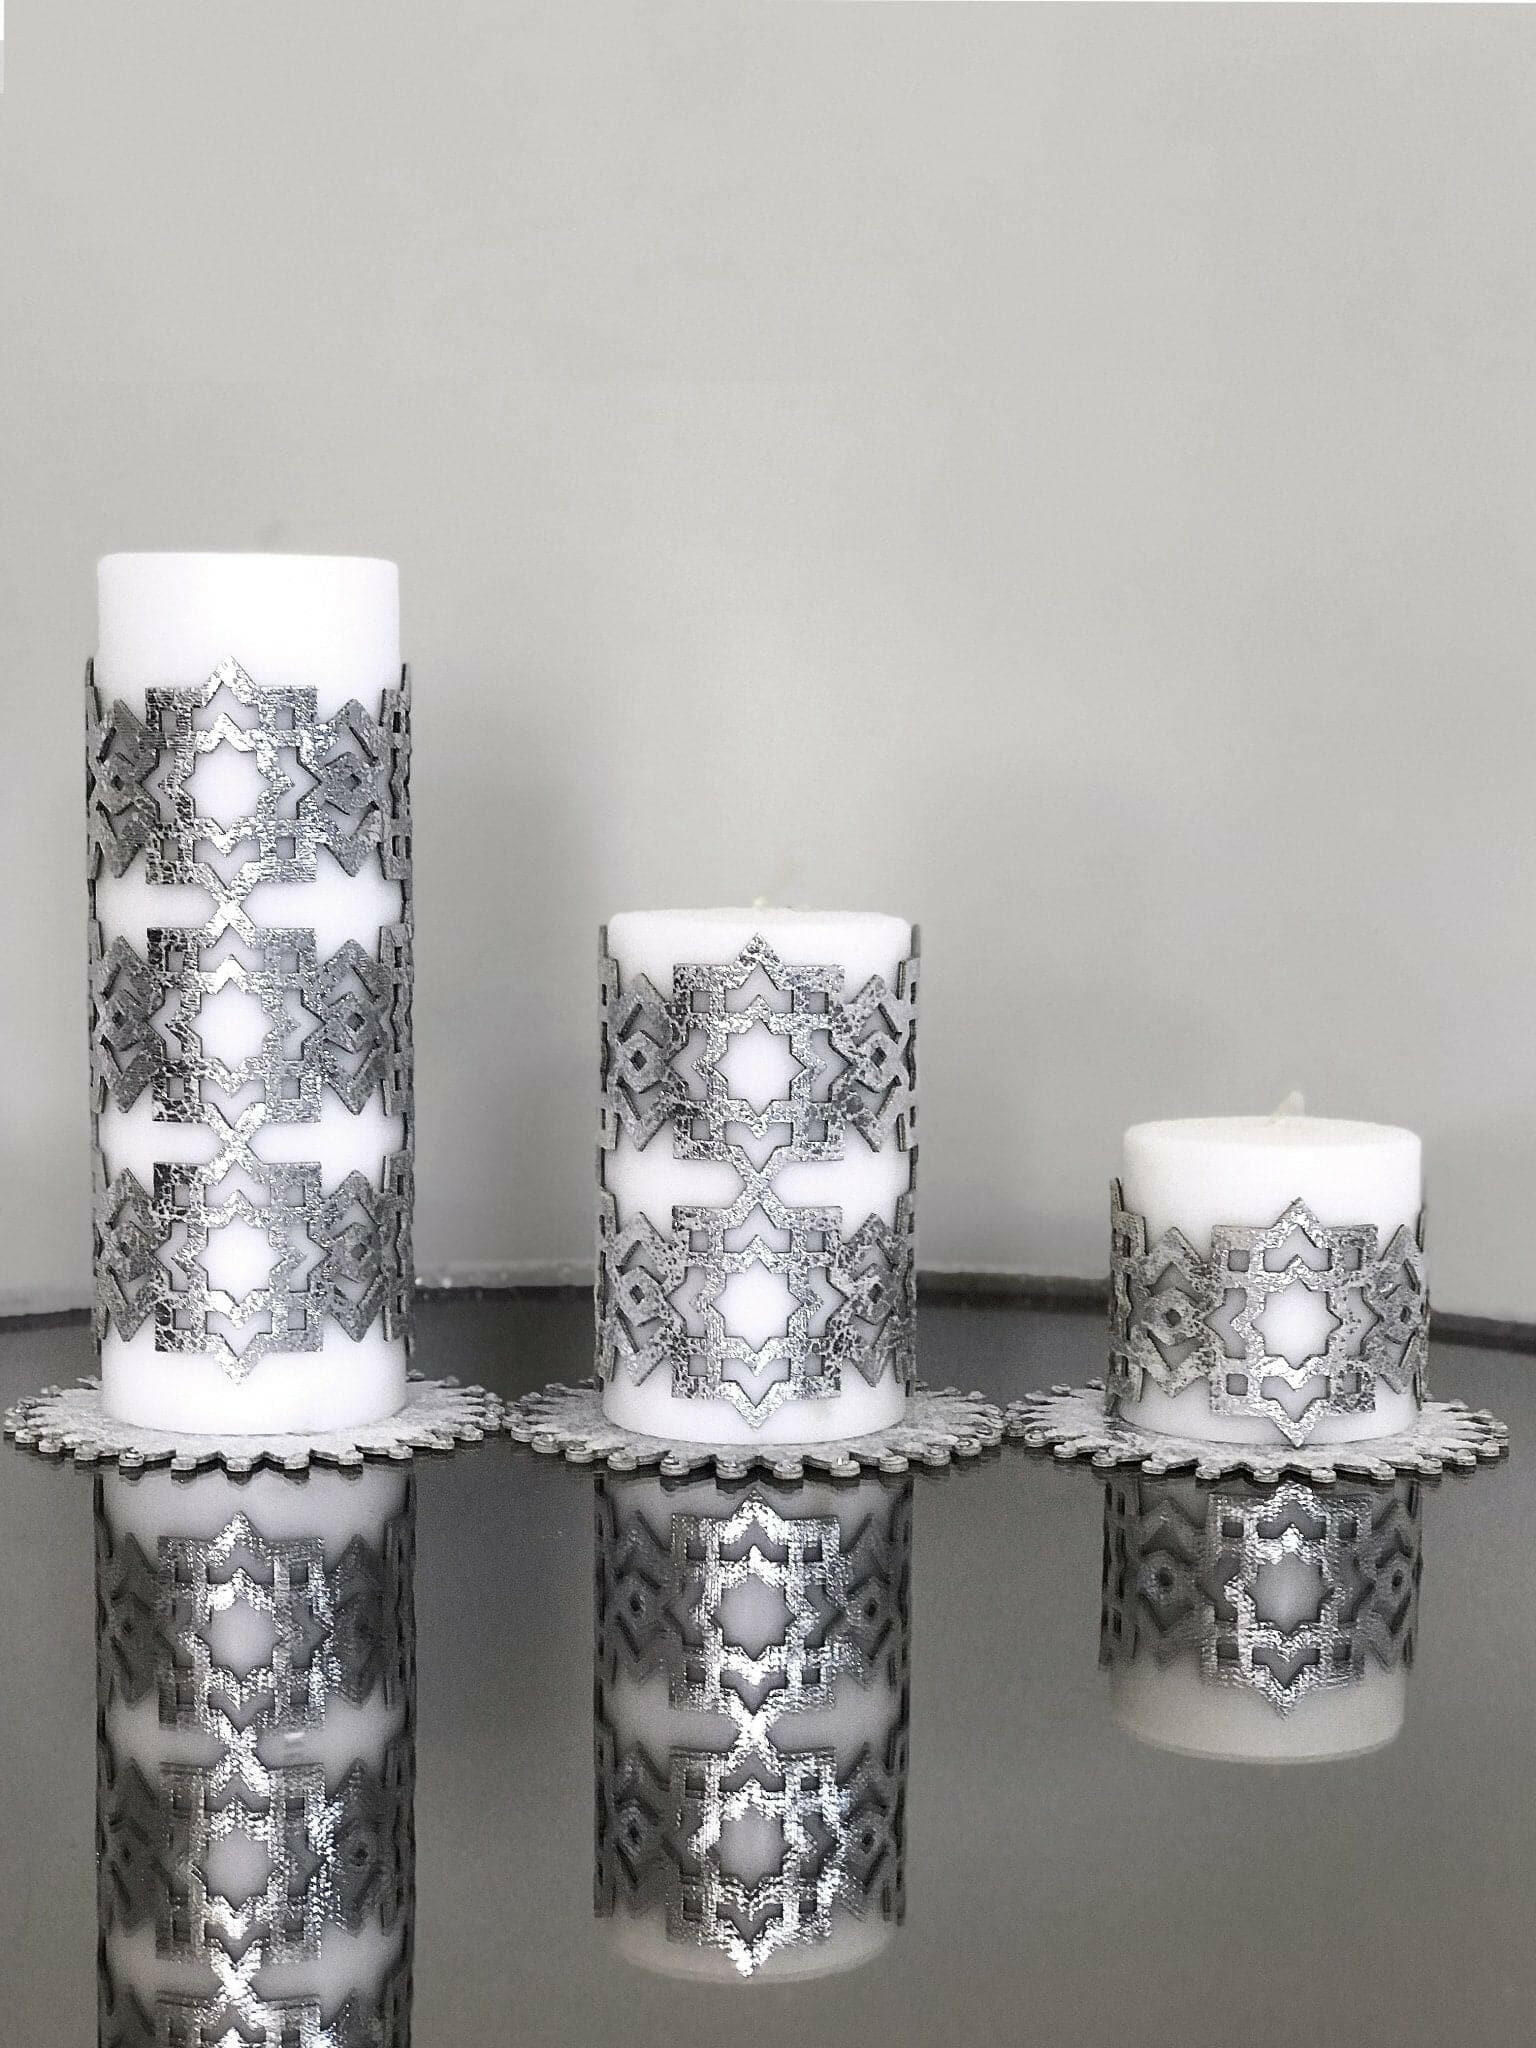 Ottoman Silver Gray Color Candle Set of 3, Leather Geometric Pattern, Decorative Creative Home Designs Candles